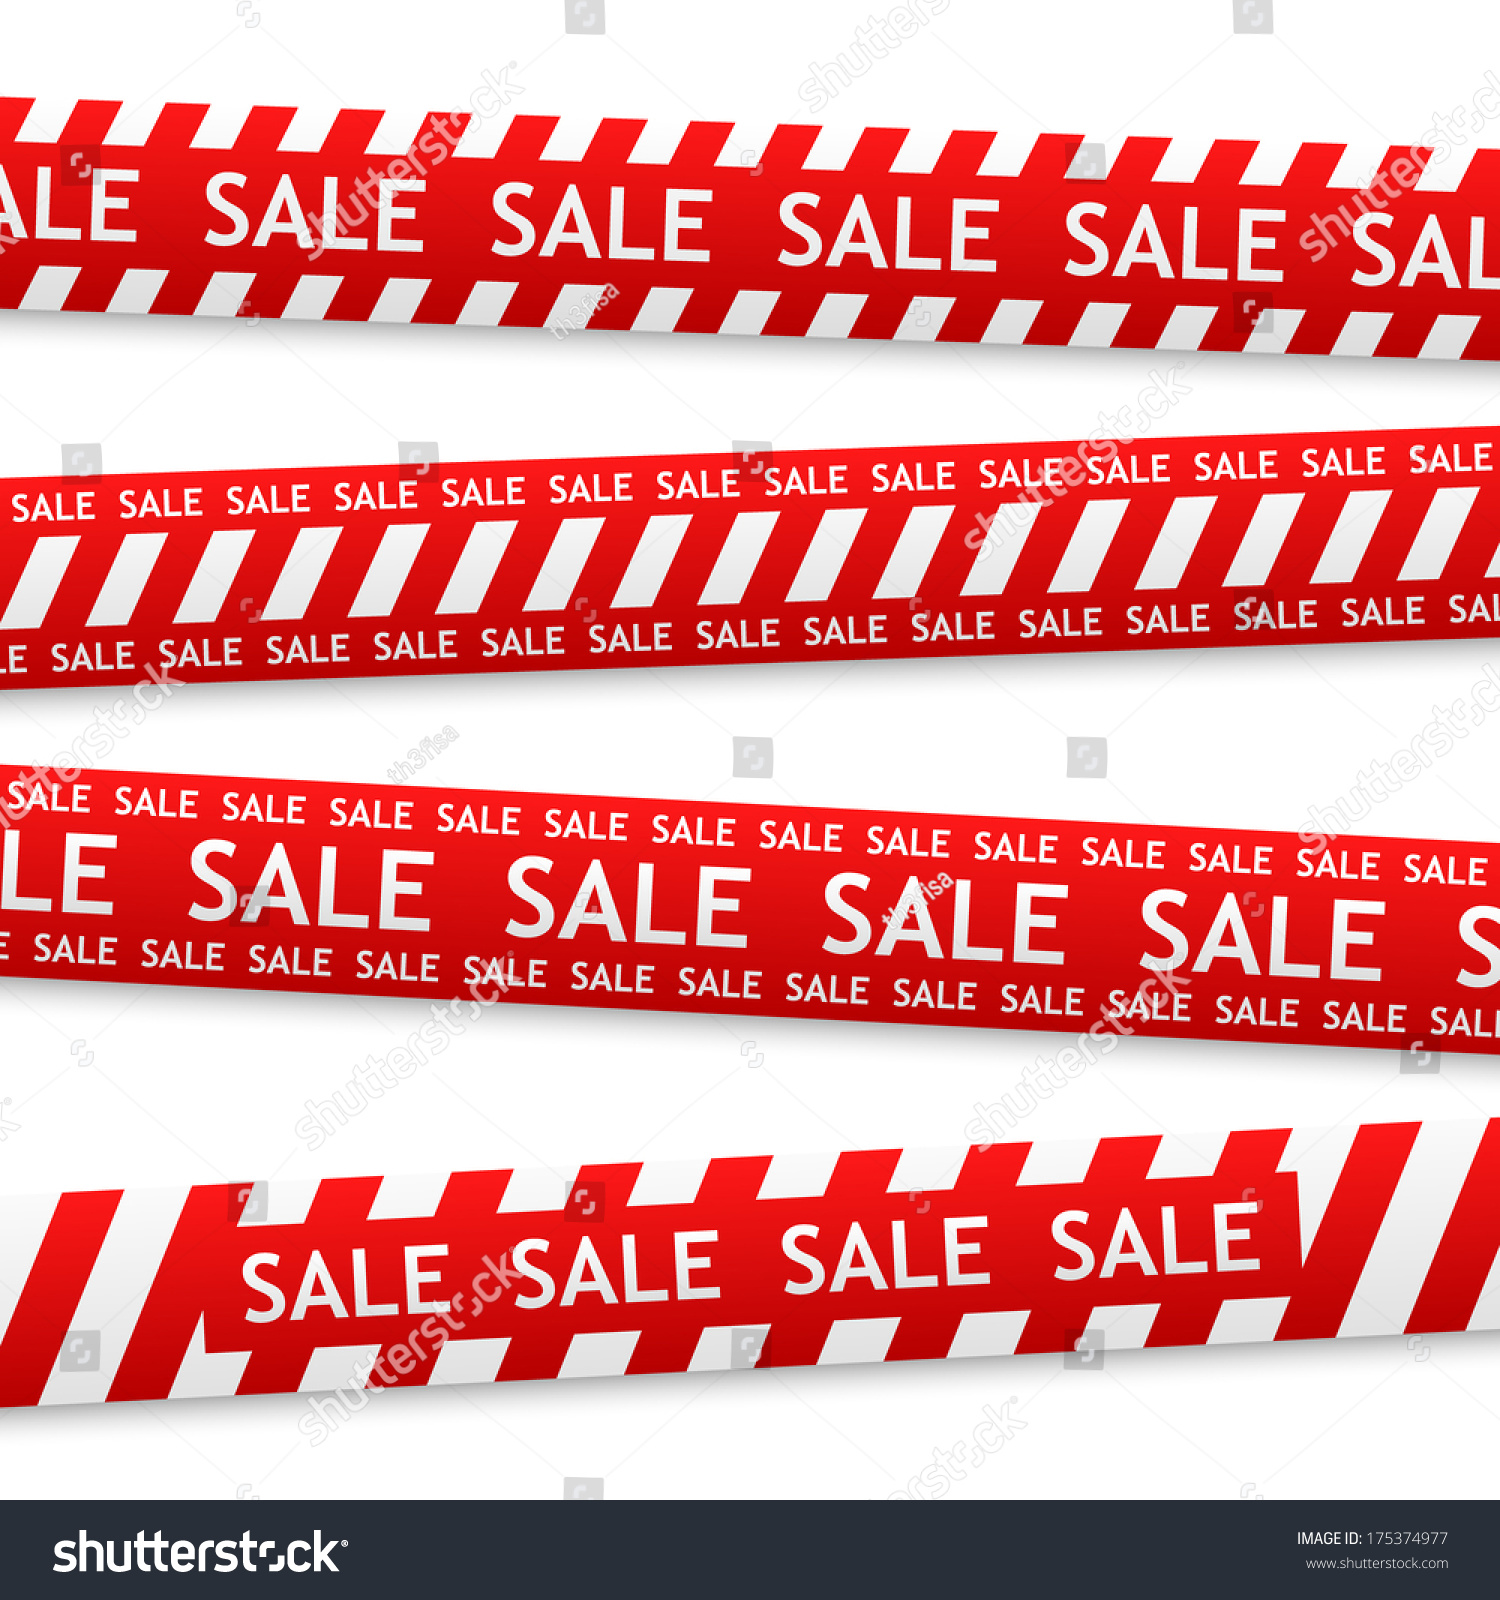 vector red bent sticker with white sale sign #175374977